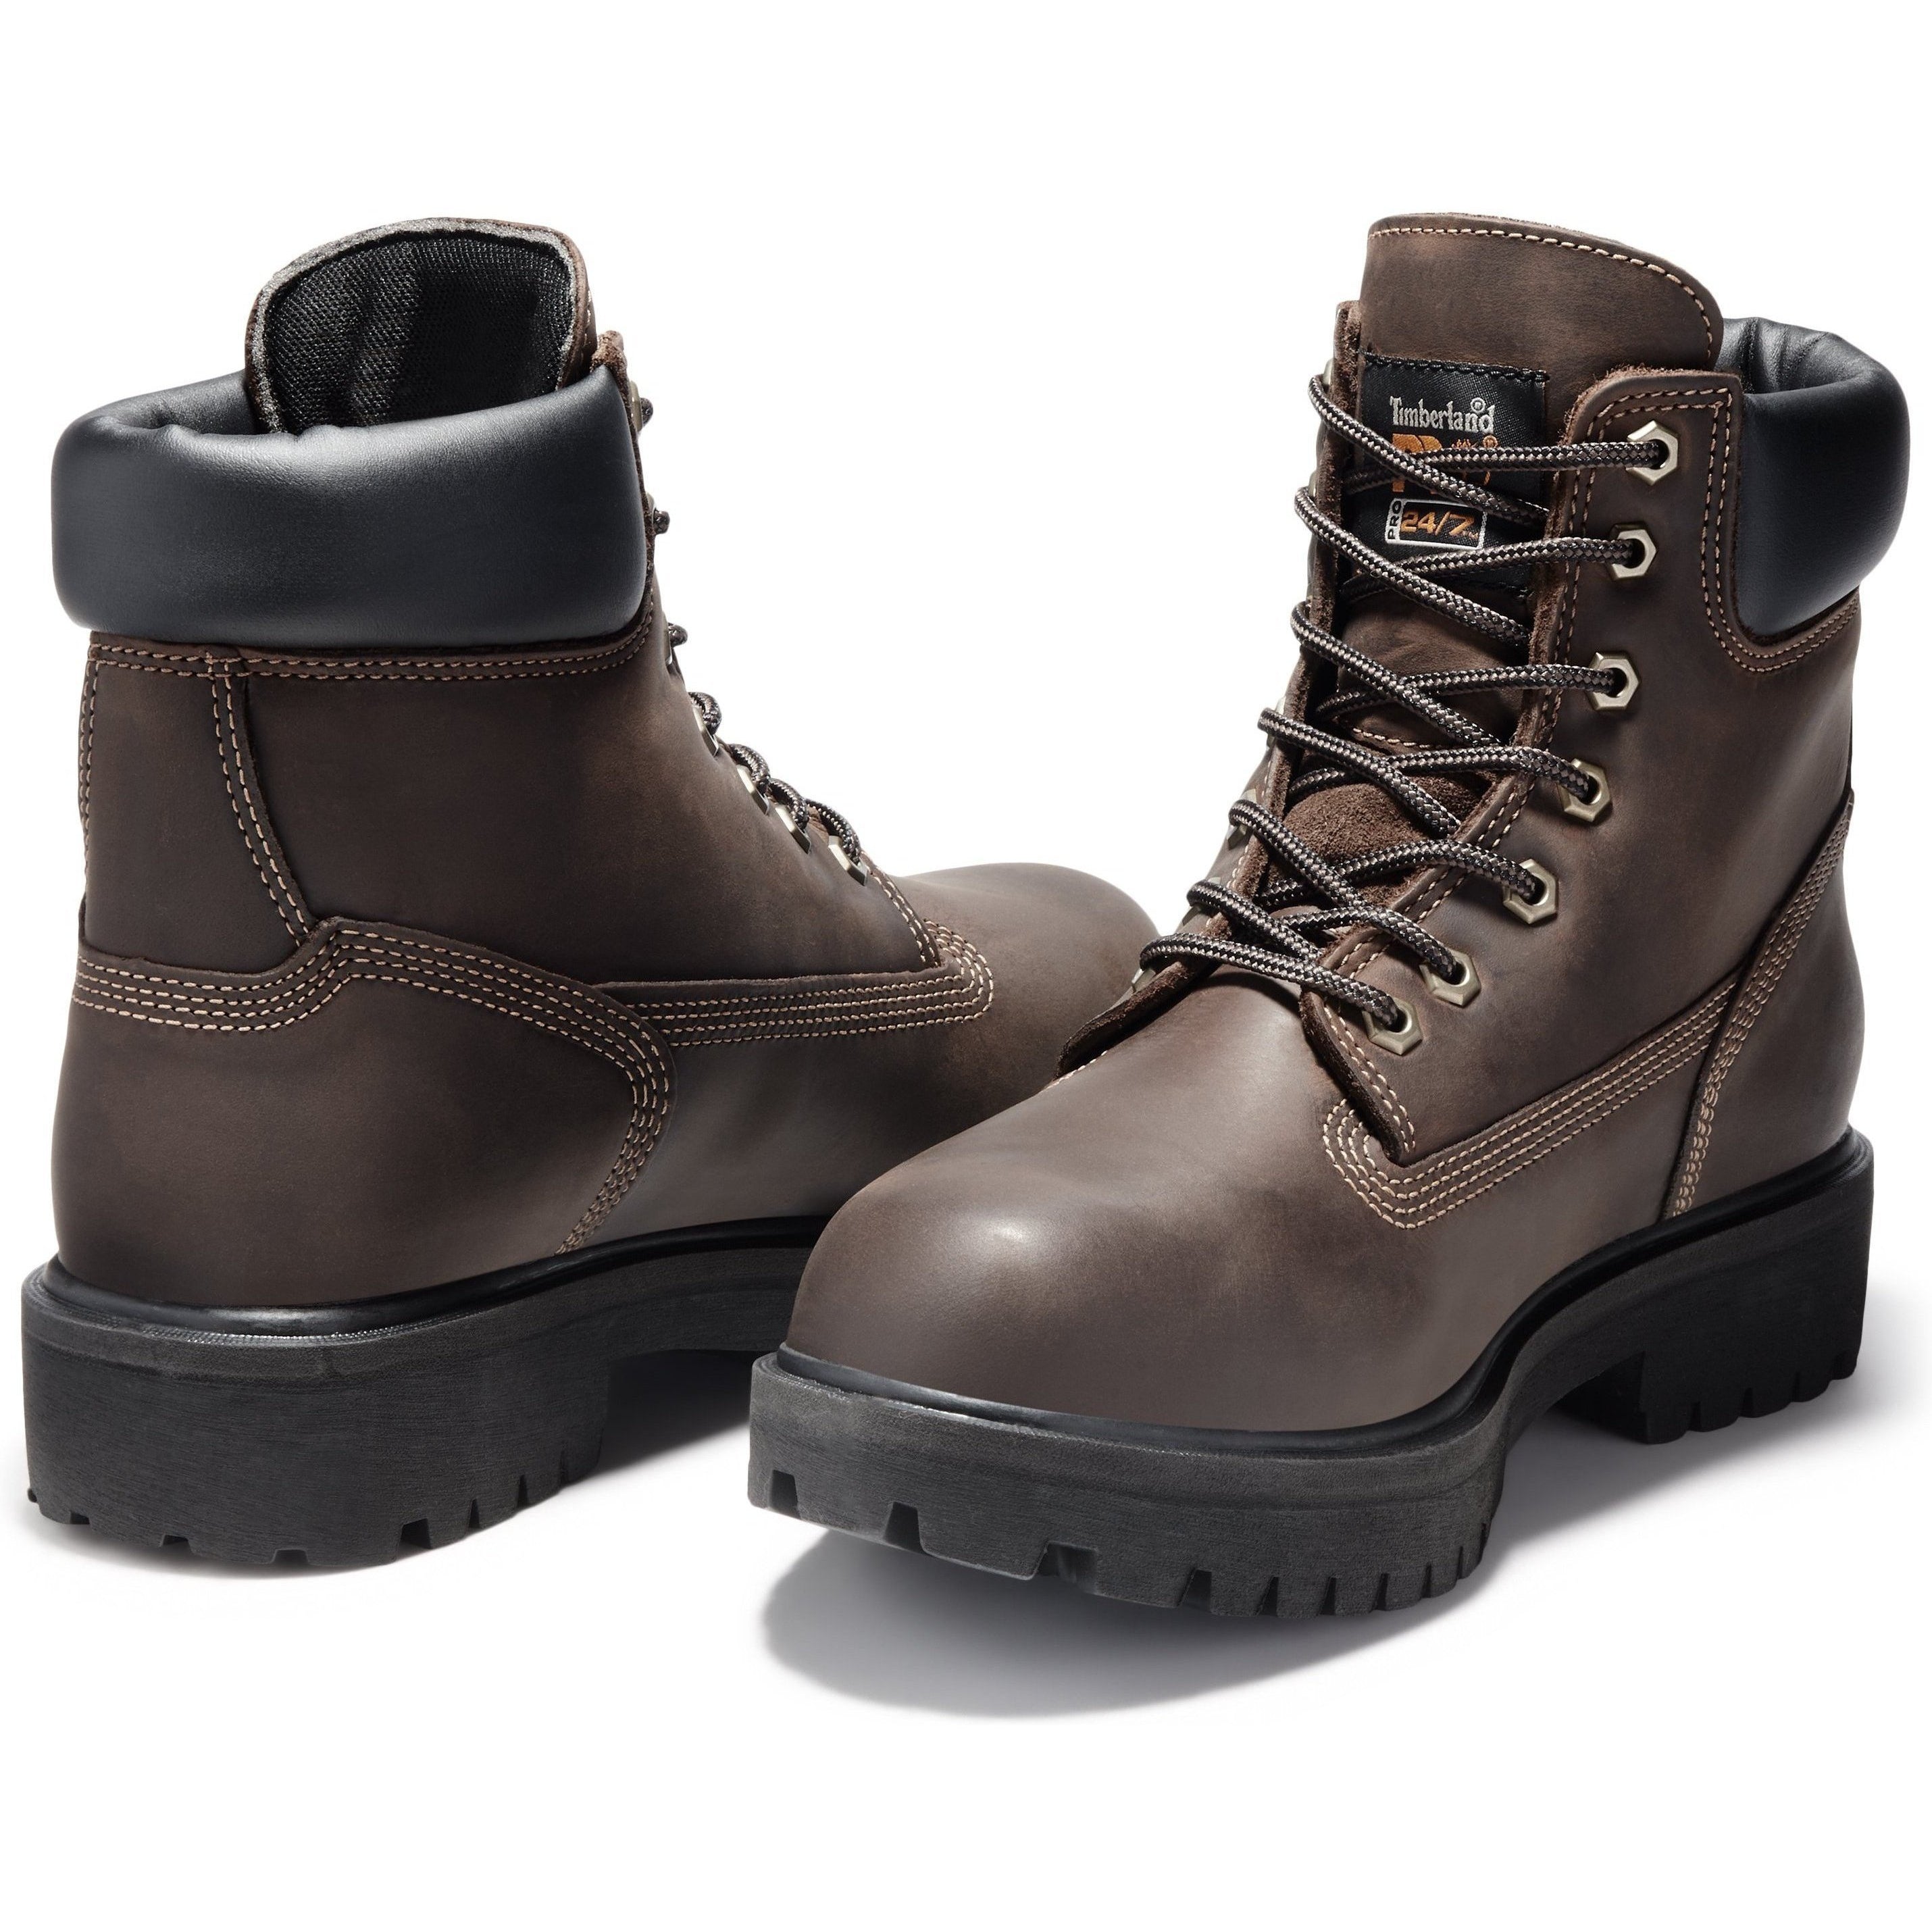 Timberland PRO Men's Direct Attach 6" Steel Toe Work Boot -TB038021242  - Overlook Boots